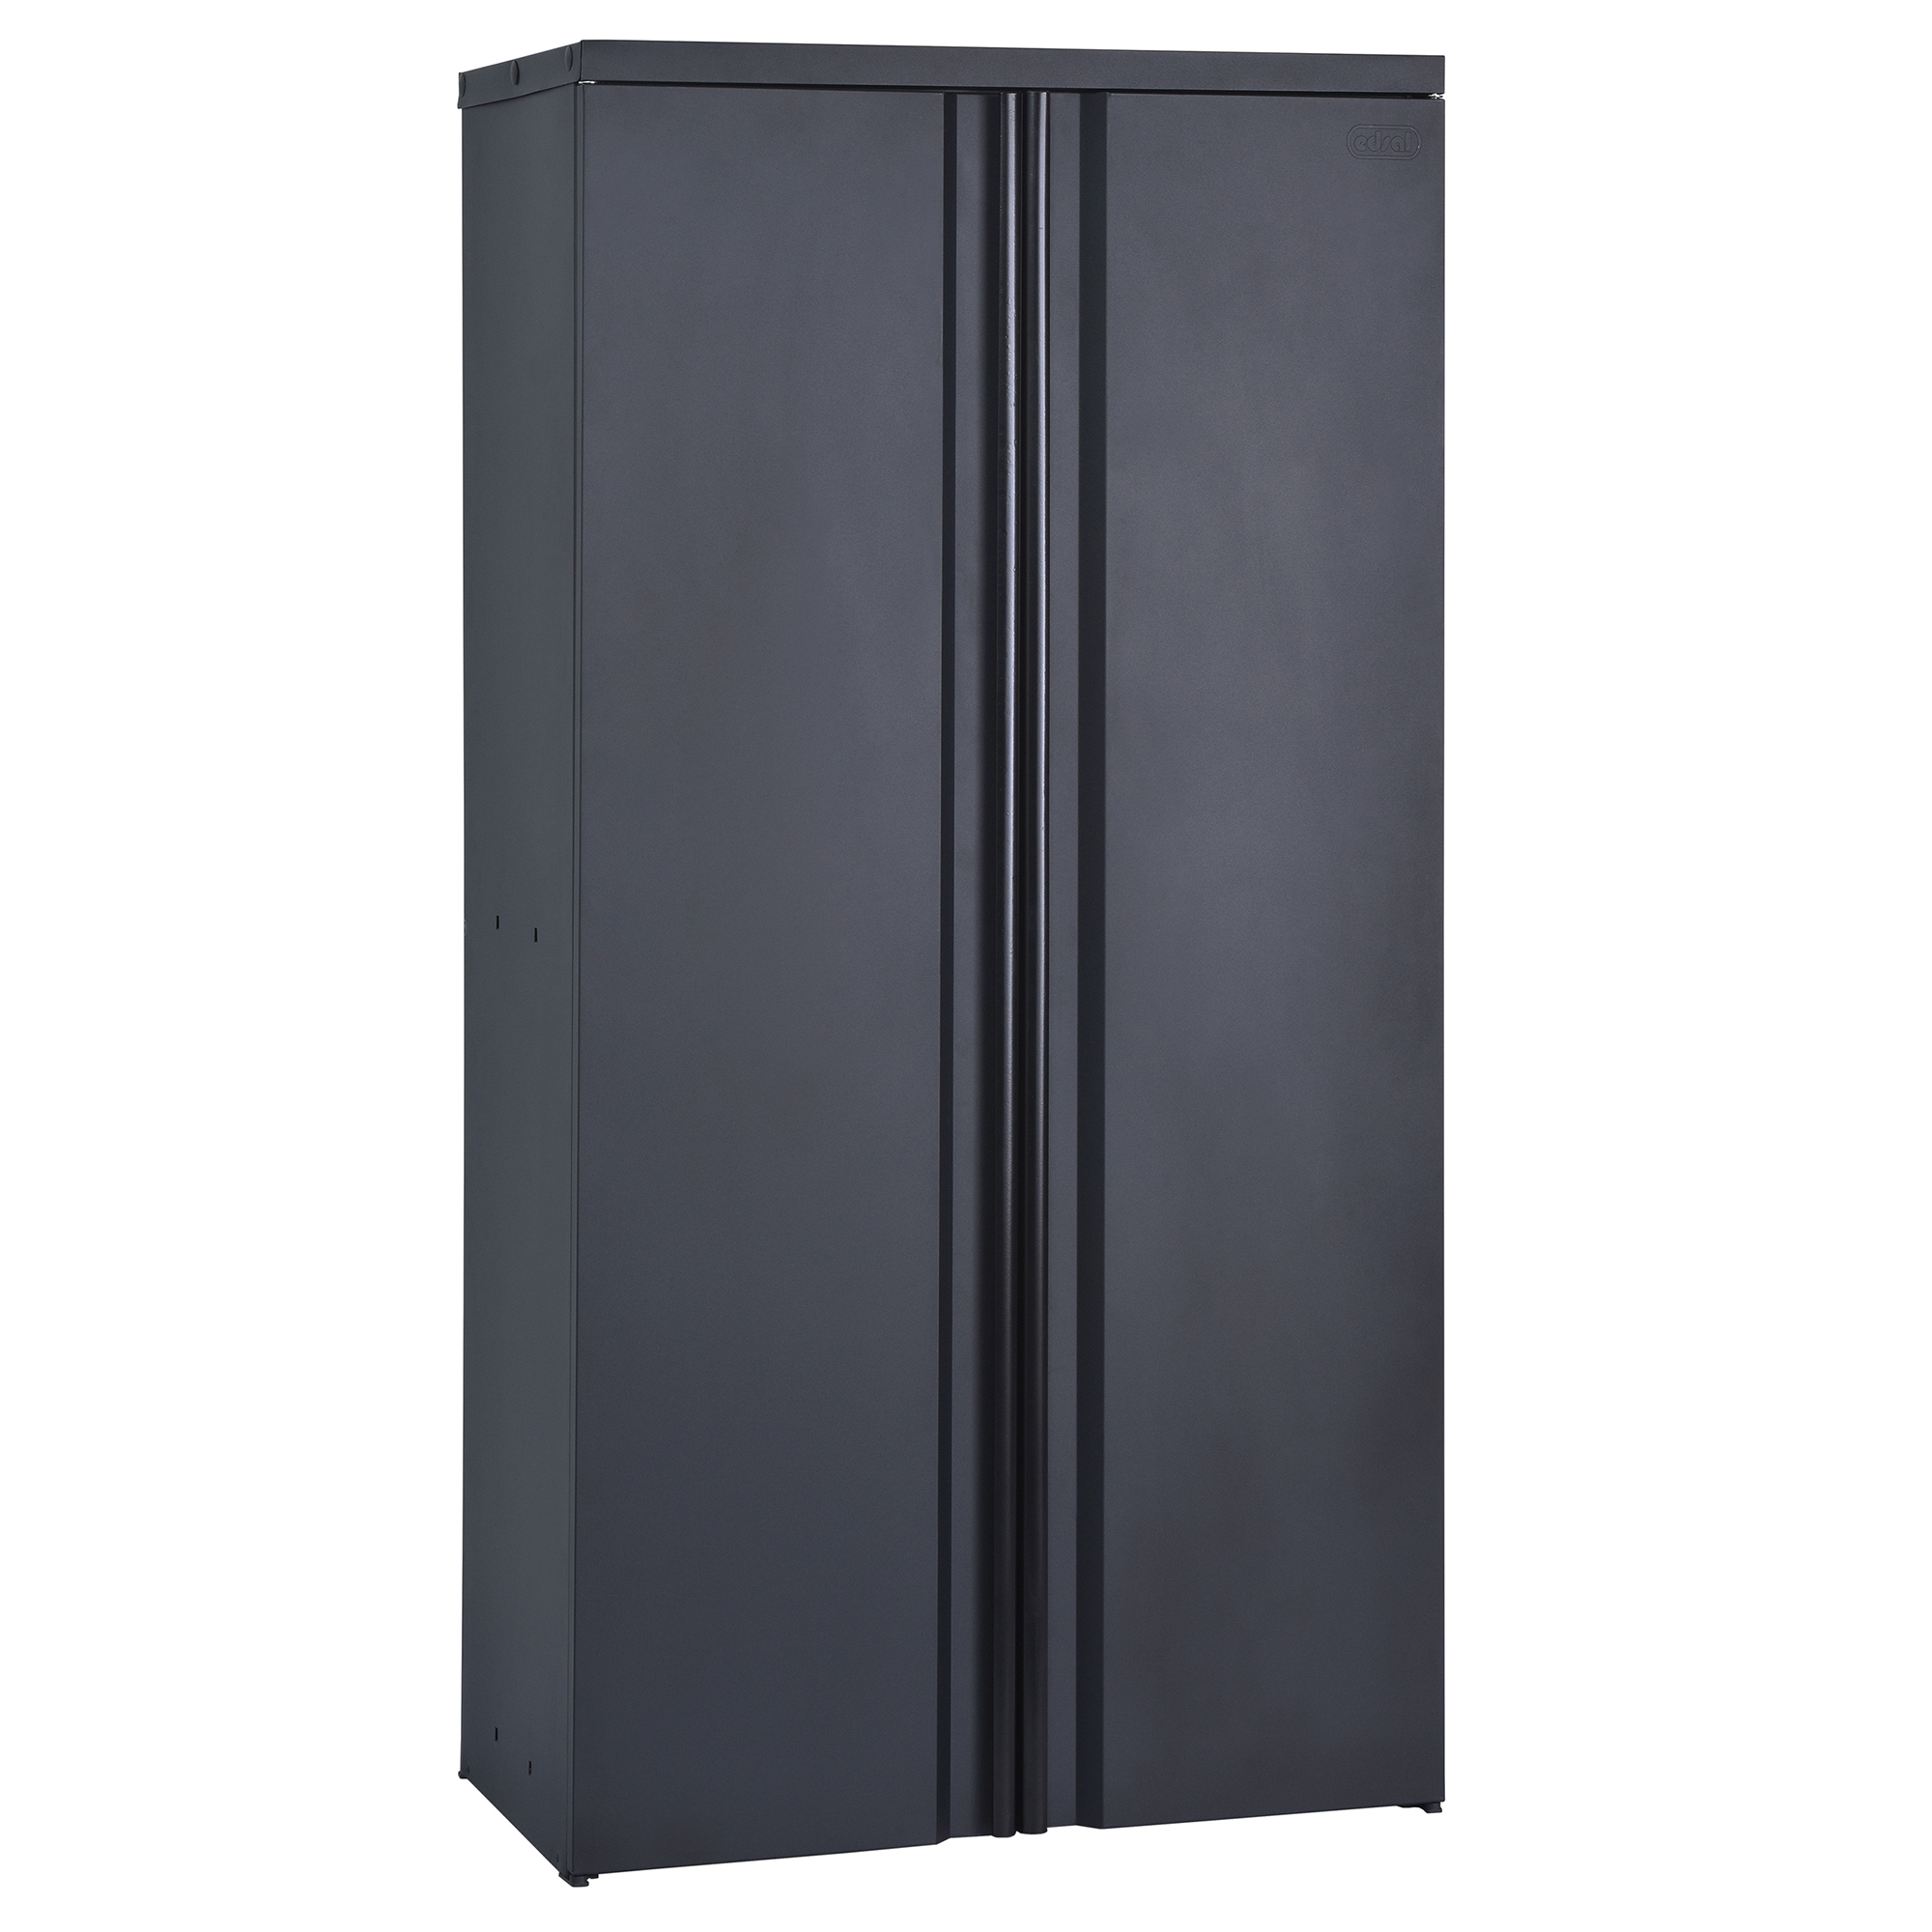 Sandusky Lee Edsal, Ready To Assemble Cabinet 36Inch Wx18Inch Dx72Inch H - Black, Height 72 in, Width 18 in, Color Black, Model RTA361872-BLK